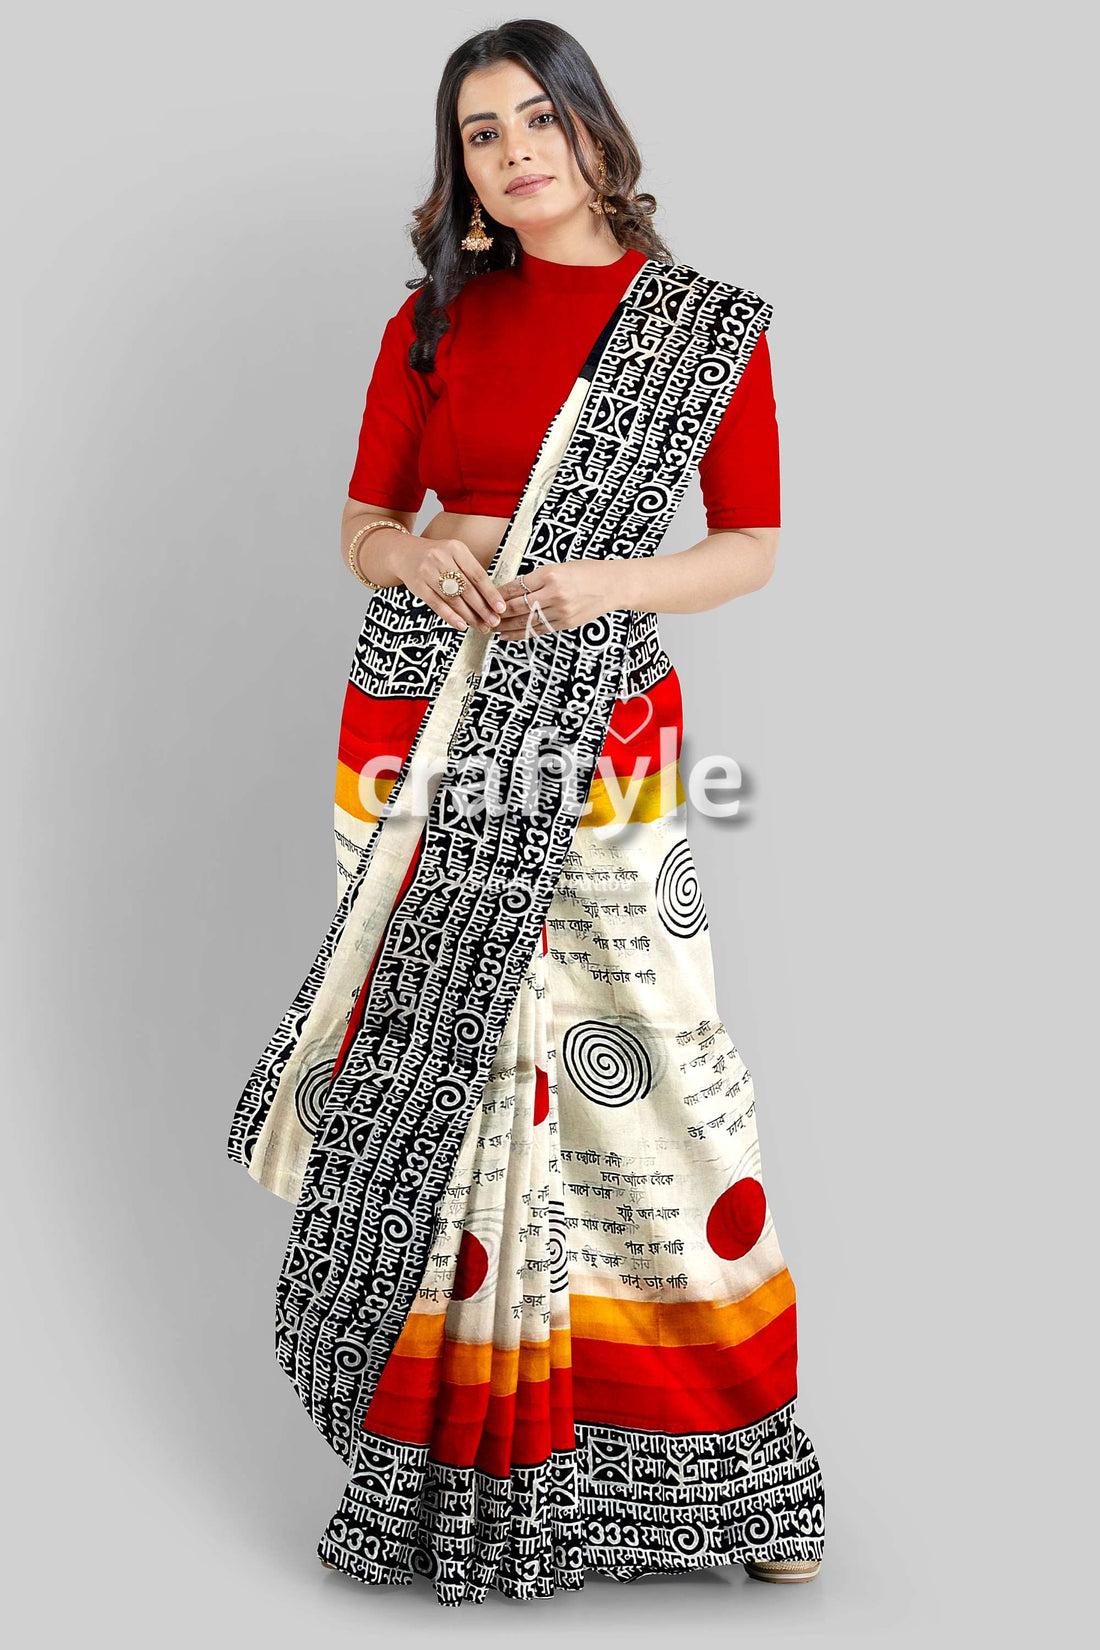 Hand Block Printed Mulberry Pure Silk Saree in Red and Black Swastik Design - Craftyle